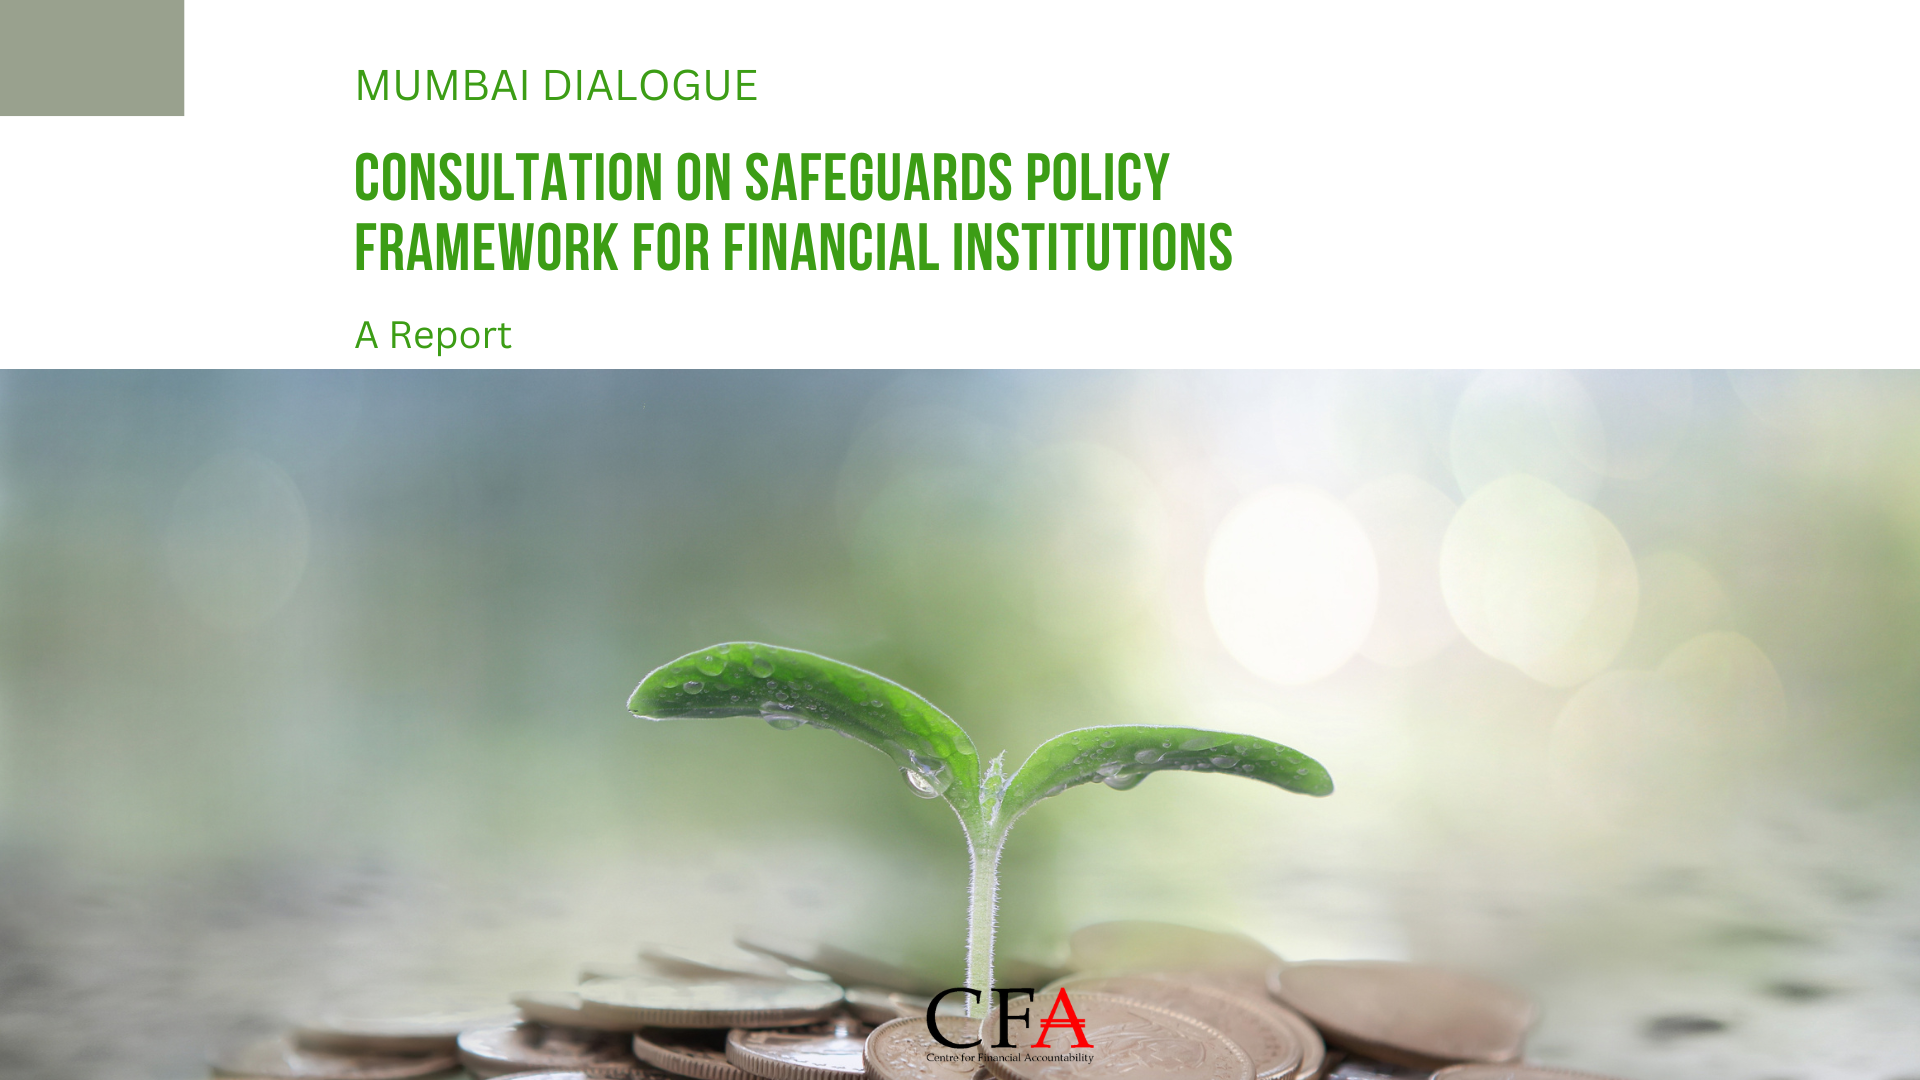 Consultation on safeguards policy framework for financial institutions: A Report